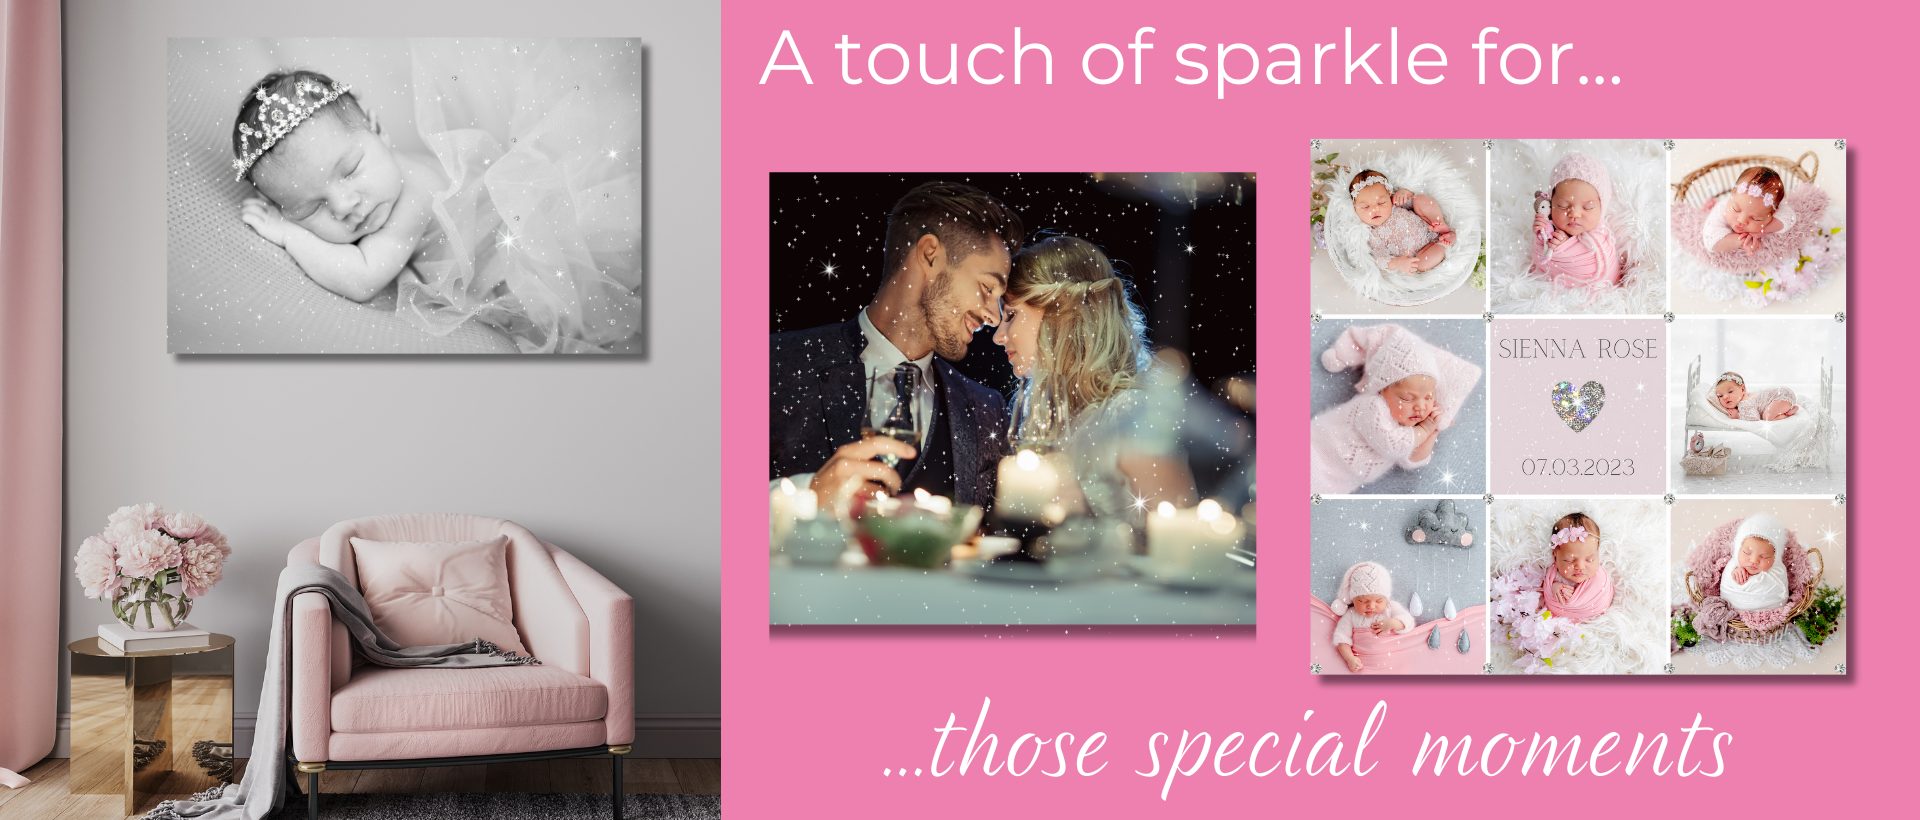 Deemonte Designs Banner Image with glitter canvas examples and text 'A touch of sparkle for those special moments'